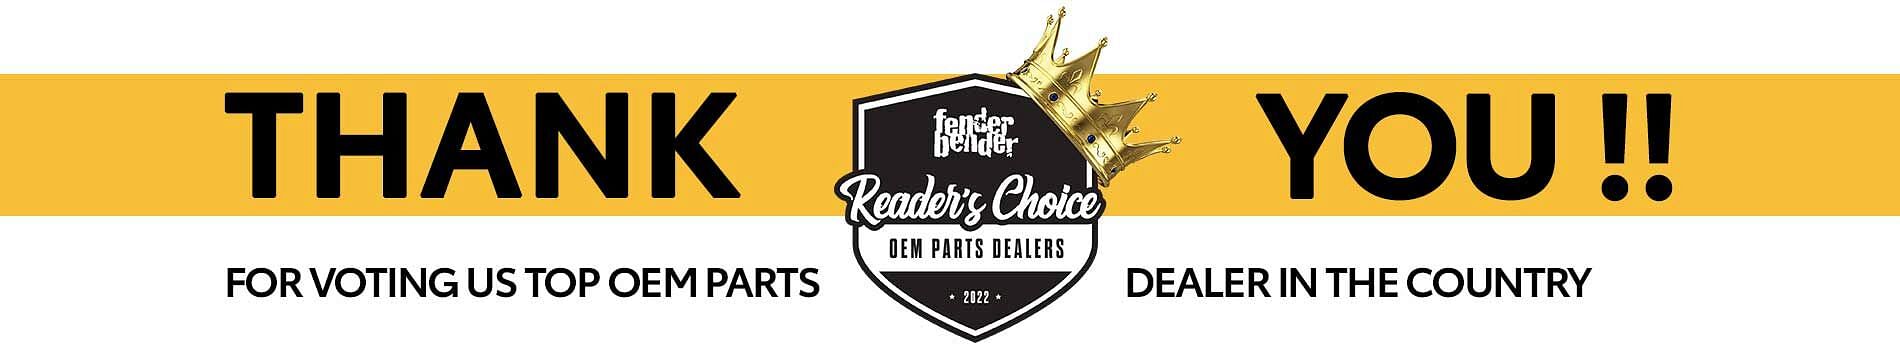 Thank you for voting West Mitsubishi top OEM parts dealer in the country as part of the Fenderbender reader’s choice awards program!